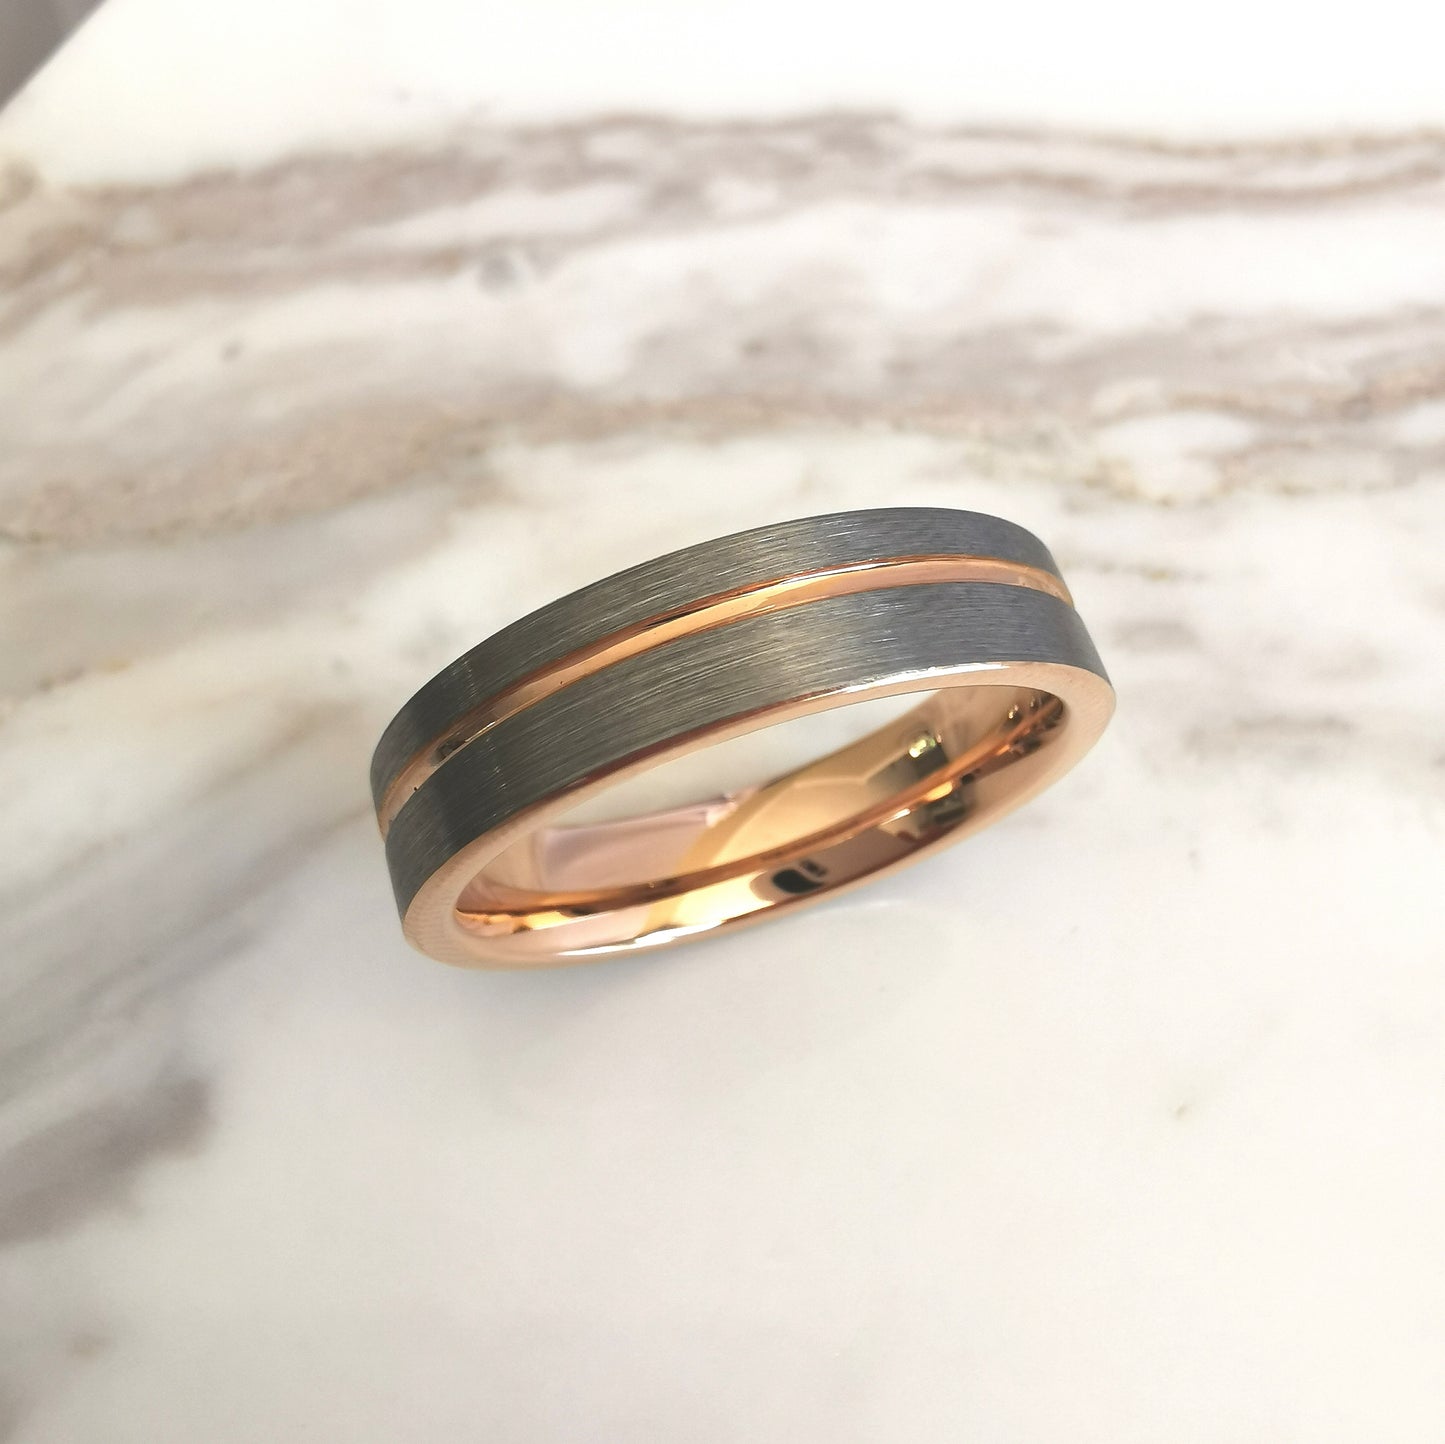 Brushed Tungsten Ring with Rose Gold Plating